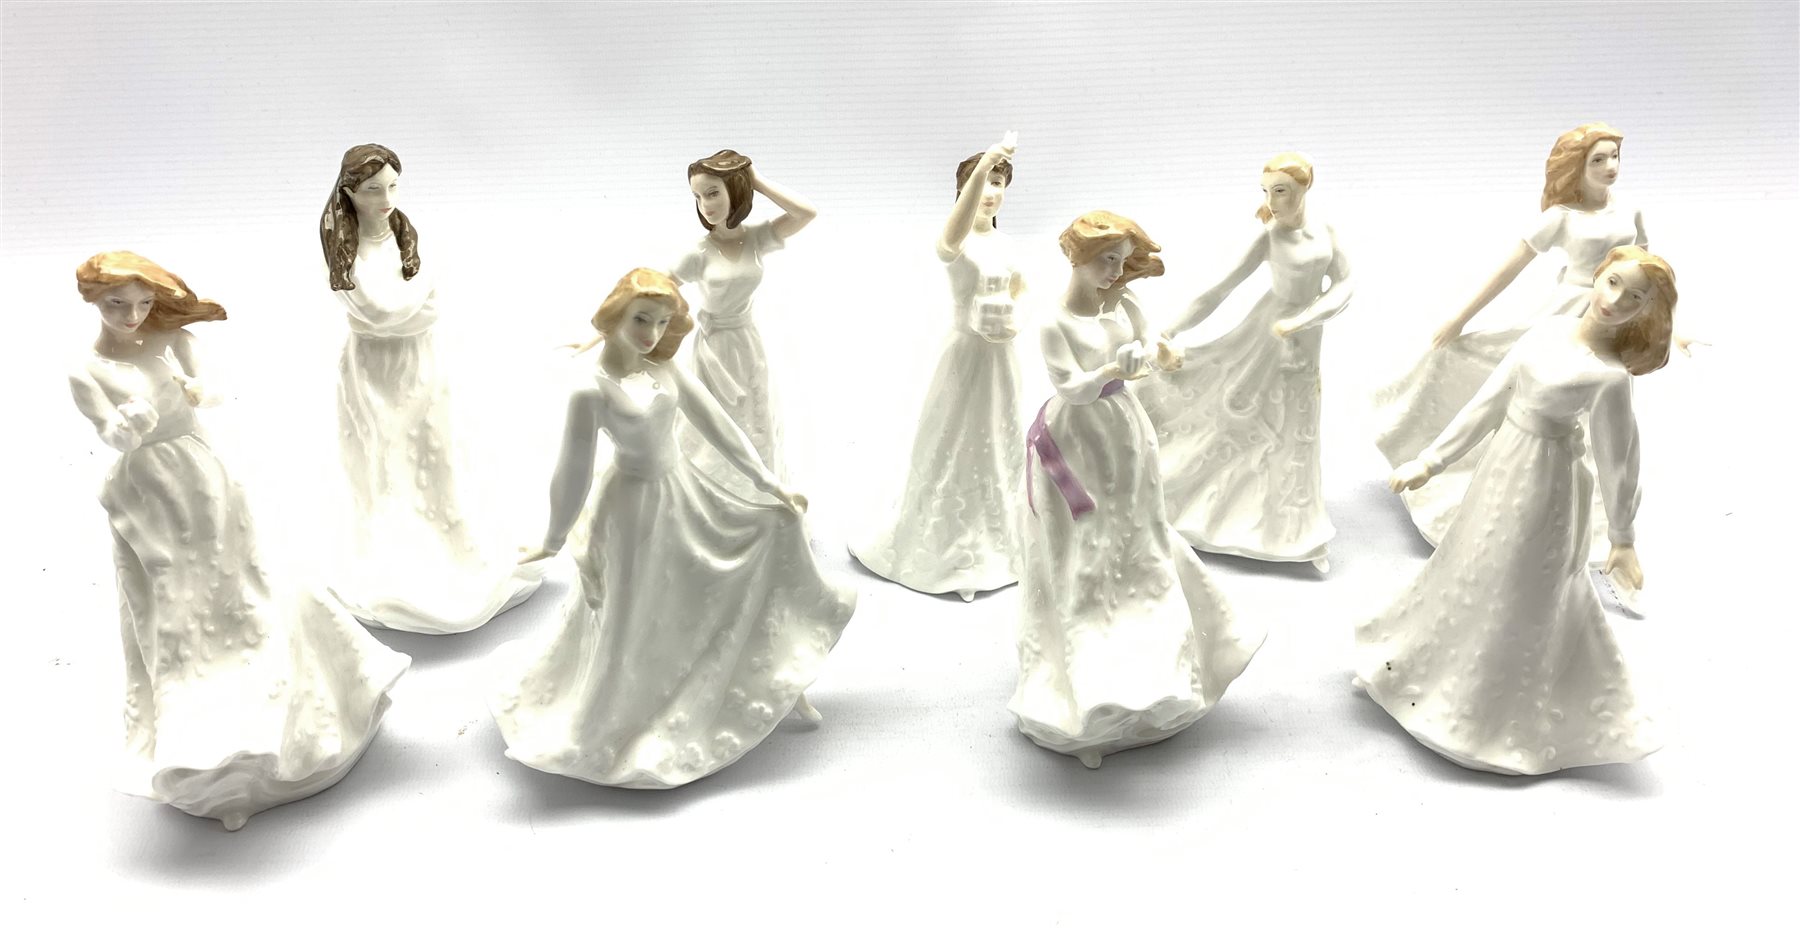 Nine Royal Doulton figures from the Sentiment series designed by A Maslankowski including Thank You, - Image 2 of 4